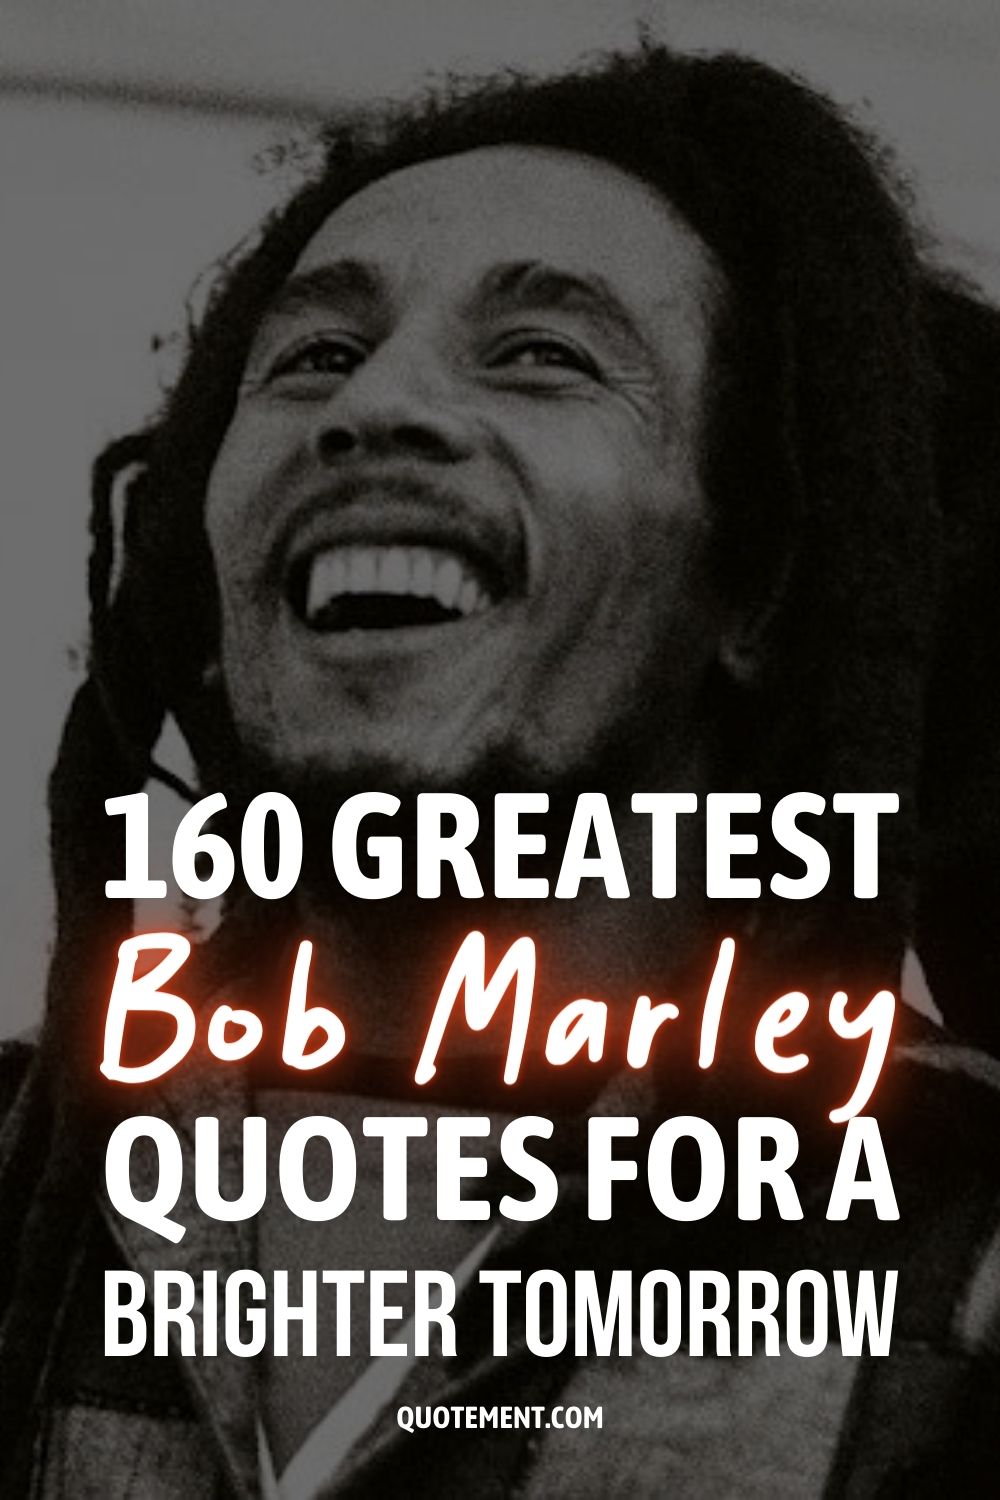 160 Greatest Bob Marley Quotes For A Brighter Tomorrow